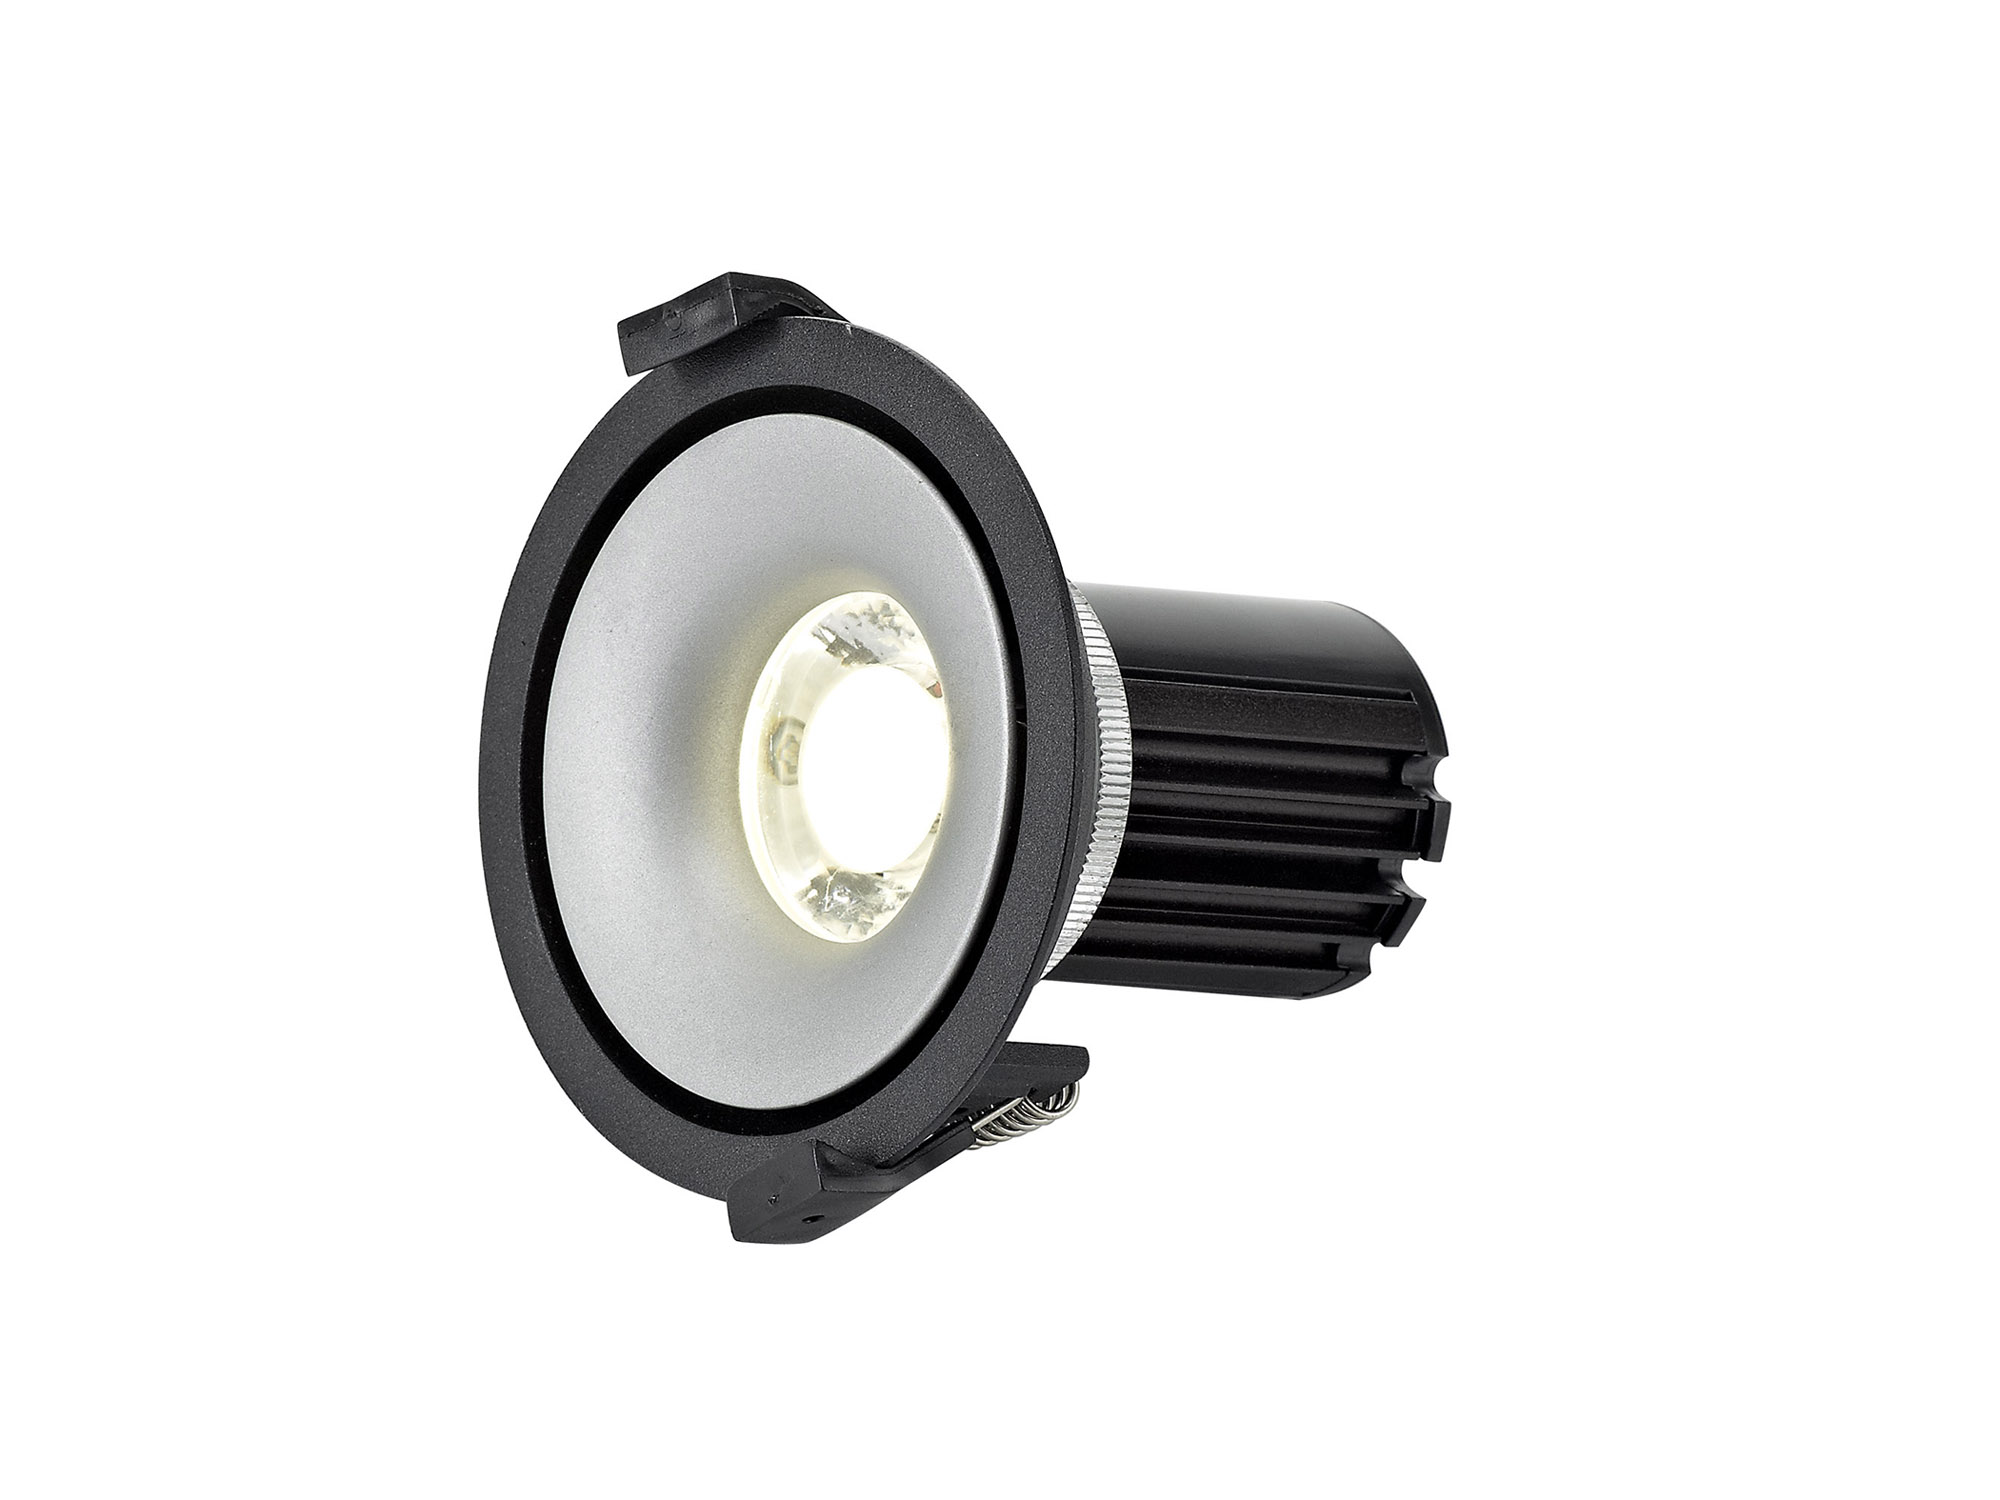 DM201078  Bolor 10 Tridonic Powered 10W 4000K 810lm 36° CRI>90 LED Engine Black/Silver Fixed Recessed Spotlight; IP20